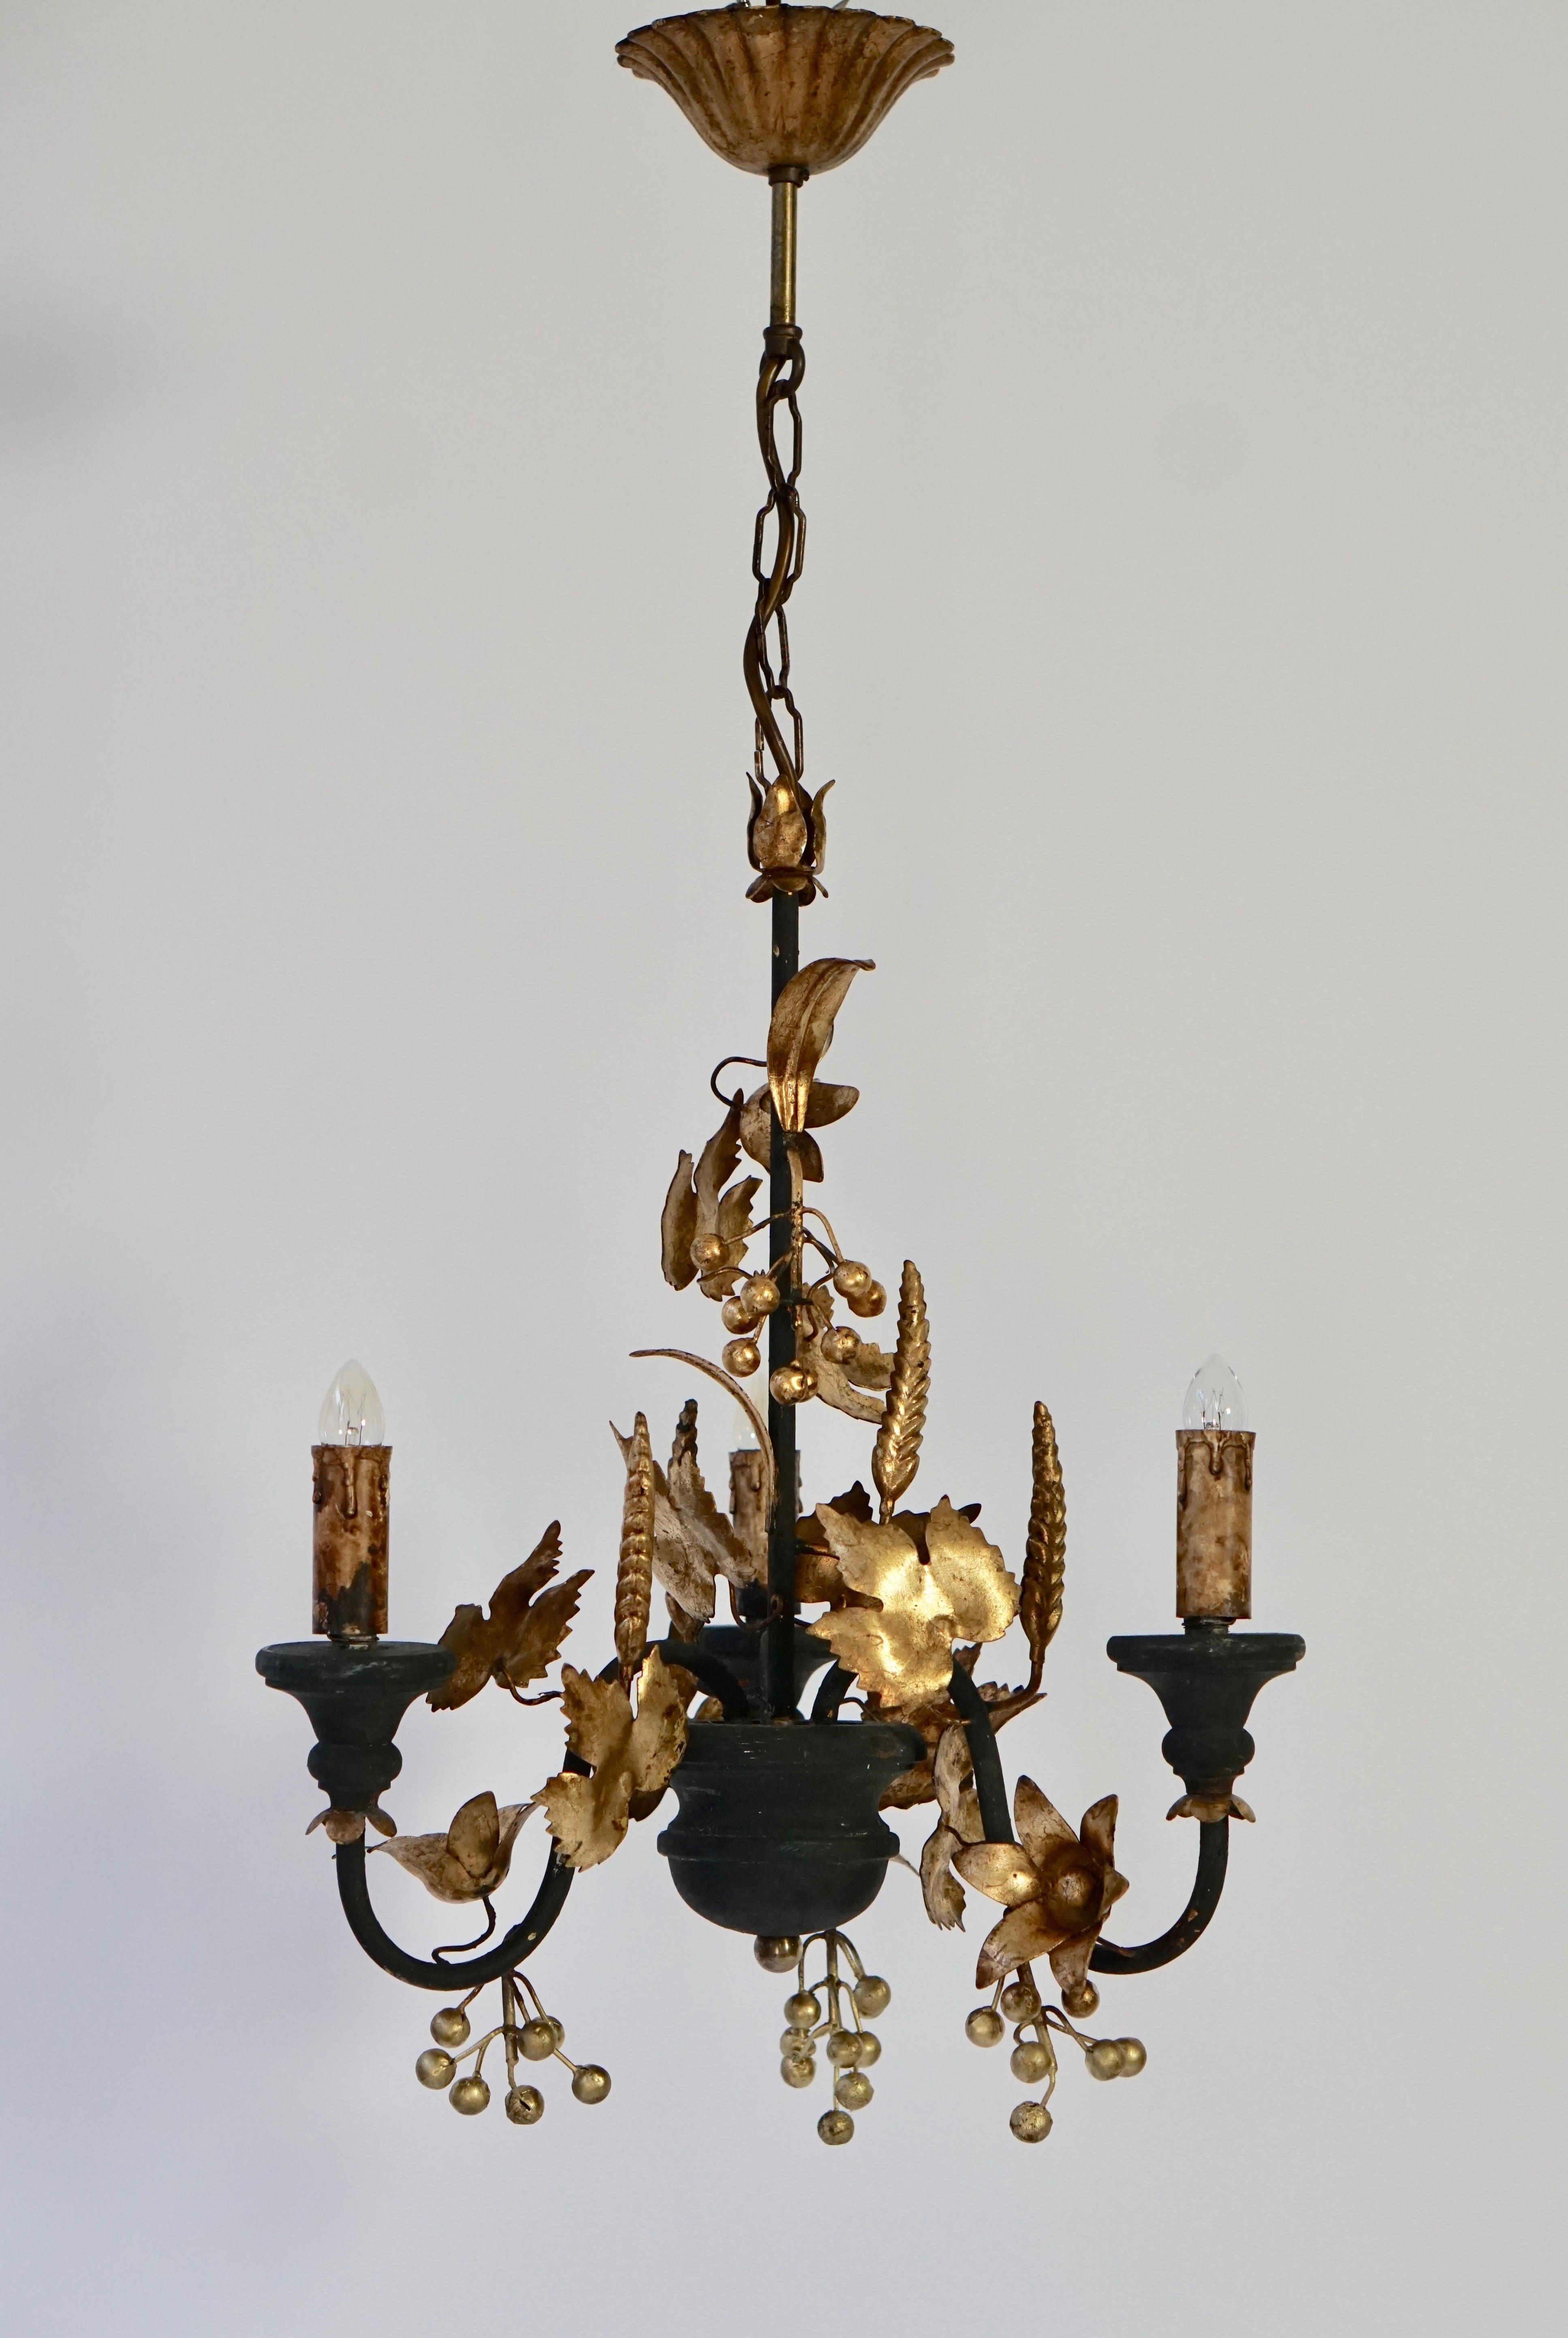 Italian chandelier in wood and gilded metal.
Measures: Diameter 36 cm.
Height fixture 50 cm.
Total height with the chain 78 cm.
Tree E14 bulbs.